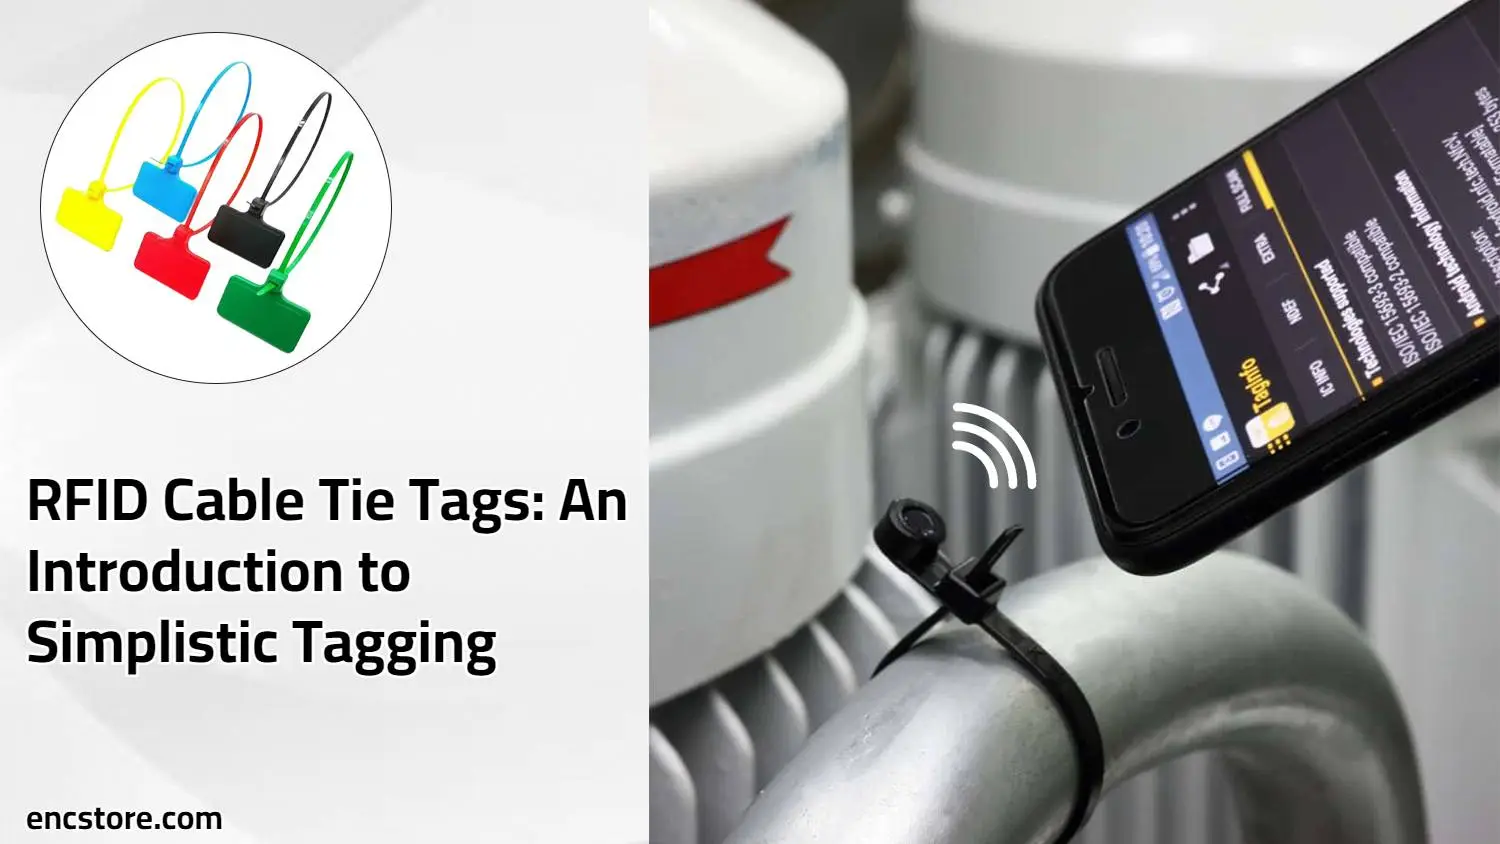 RFID Cable Tie Tags: An Introduction to Simplistic Tagging